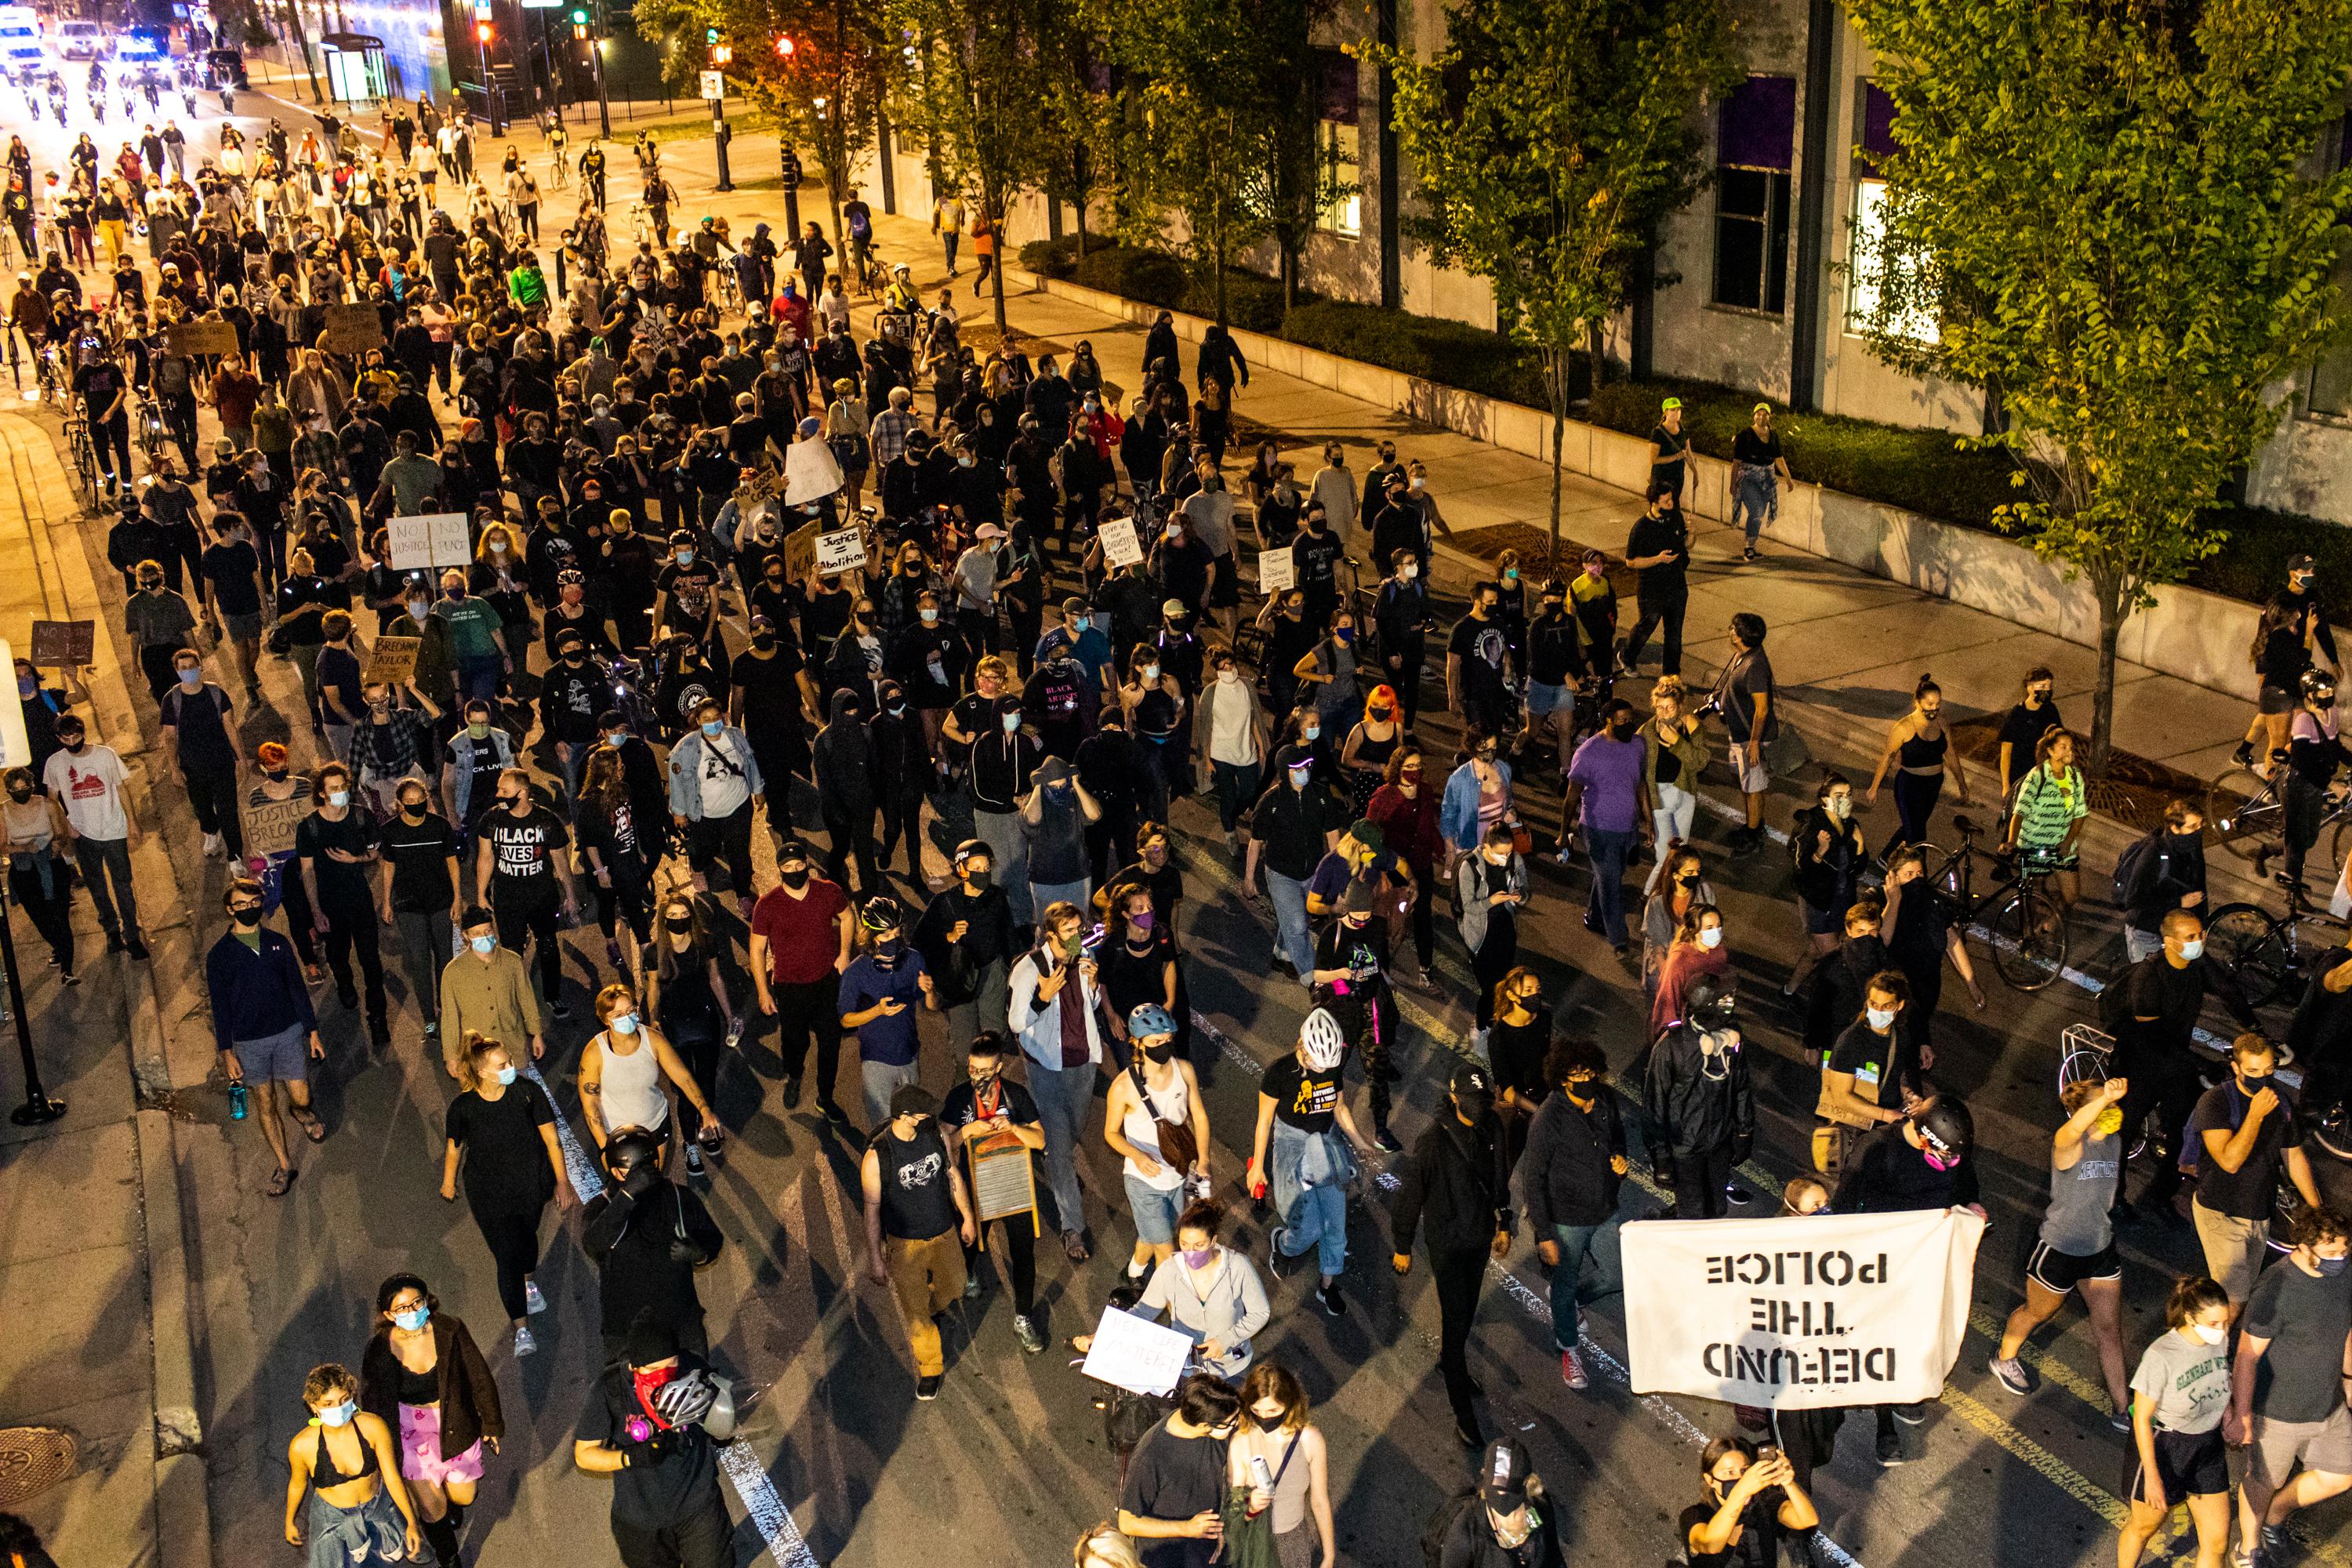 Protesters fill the streets during a march for Breonna Taylor on September 23, 2020 in Chicago, Illinois.